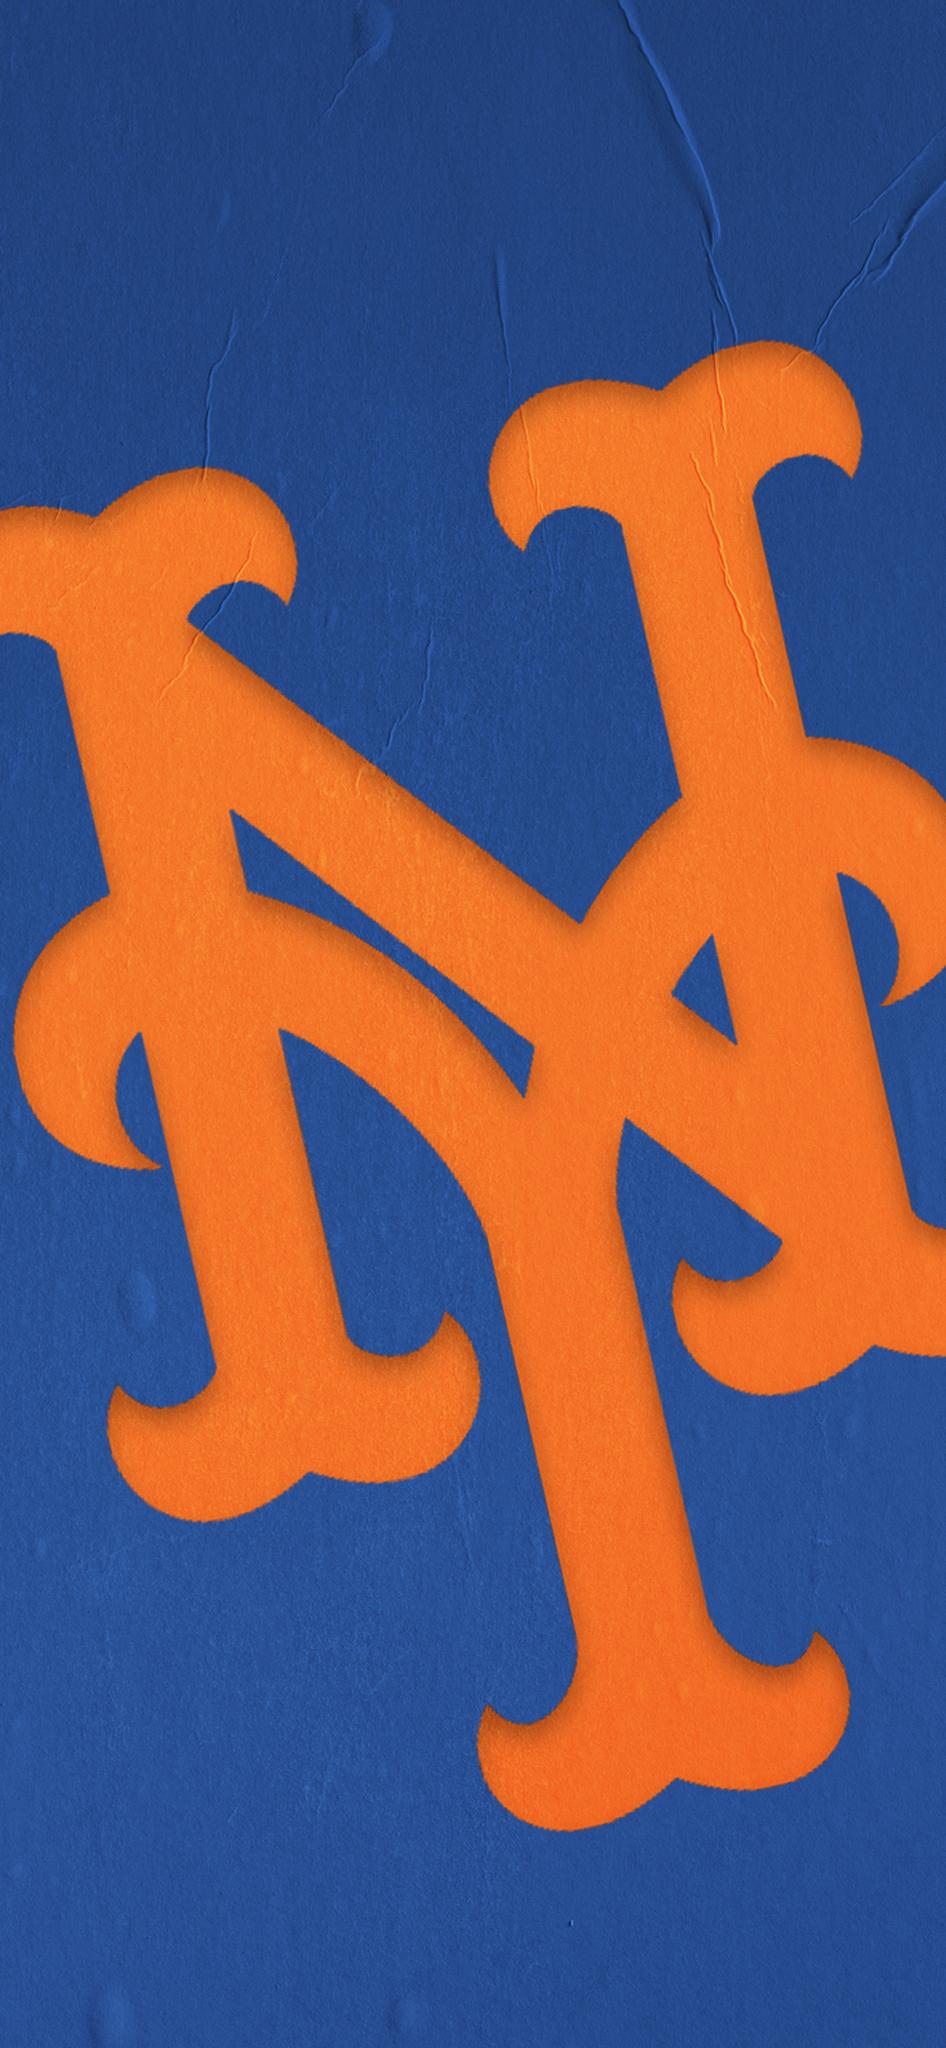 I made some mets Phone wallpapers  rNewYorkMets